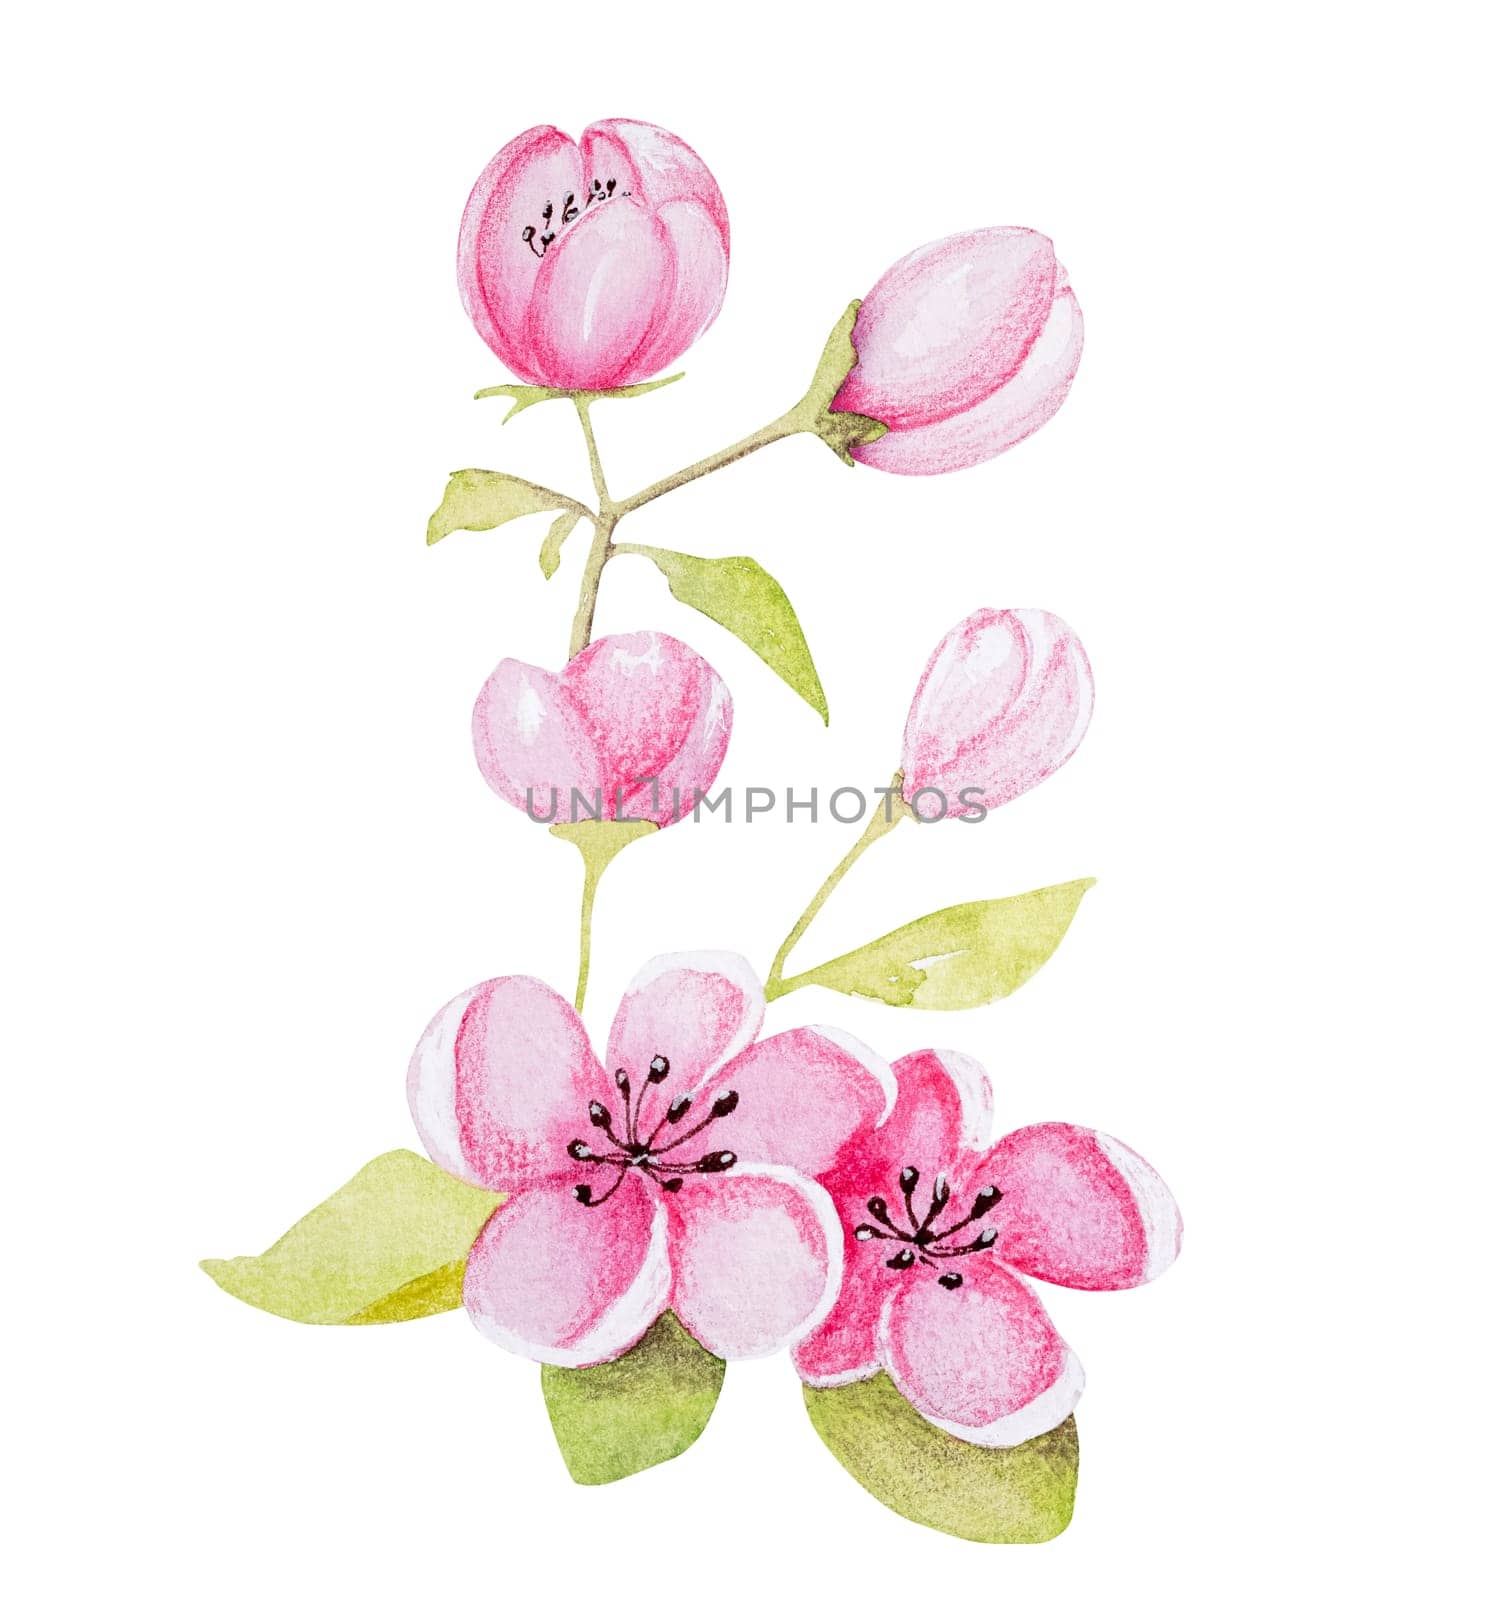 Hand-Drawn Watercolor Illustration Of Apricot Blossom Branch by tan4ikk1